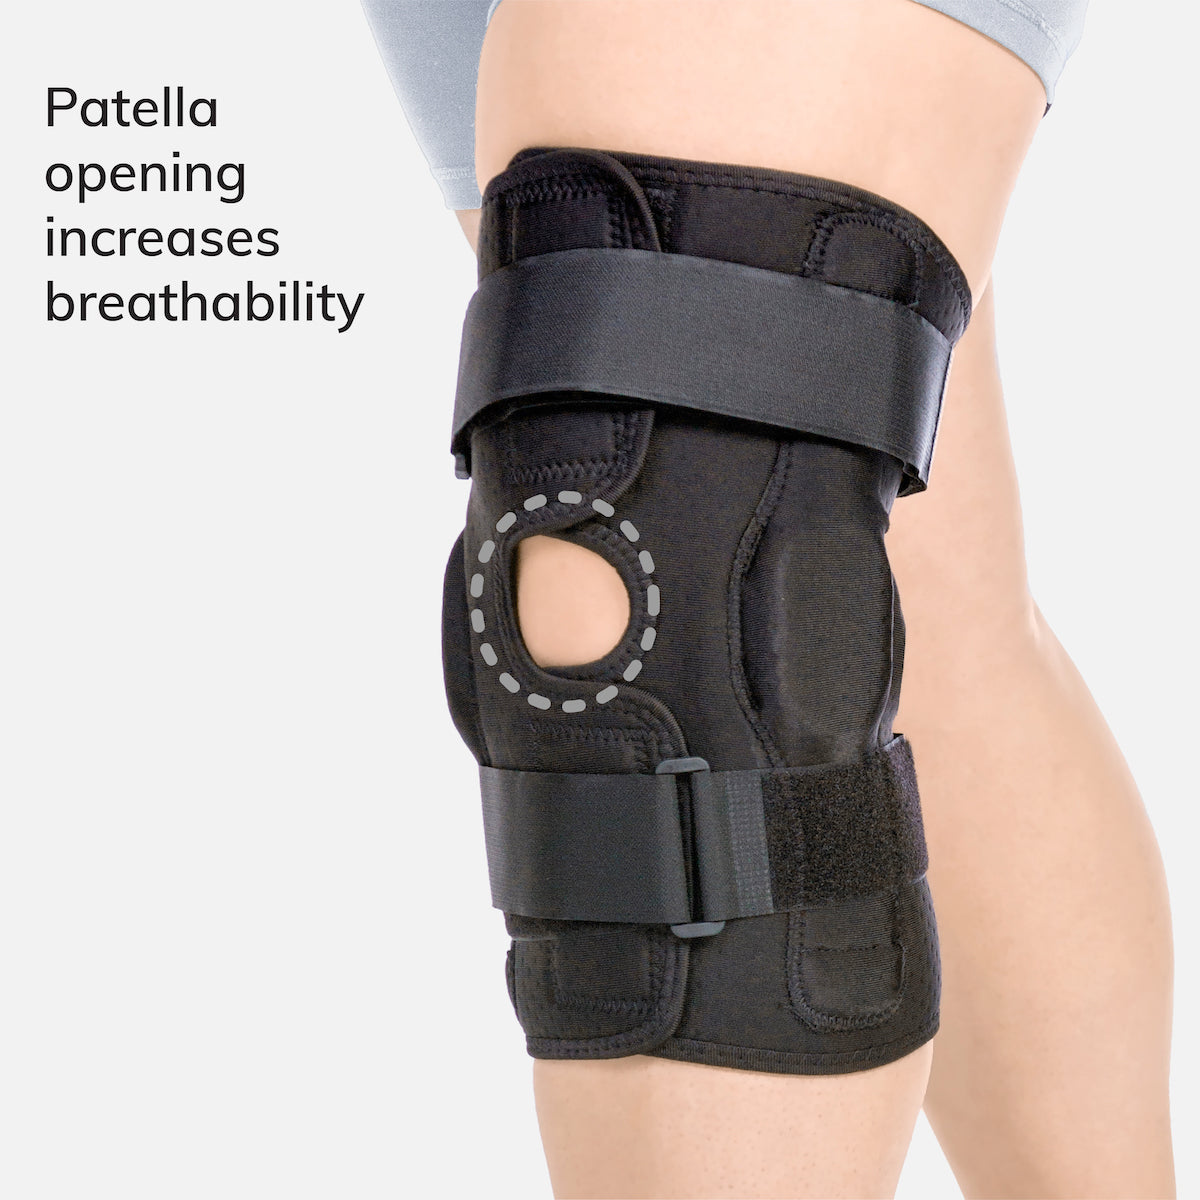 The torn meniscus knee brace has a patella opening for increased kneecap stability